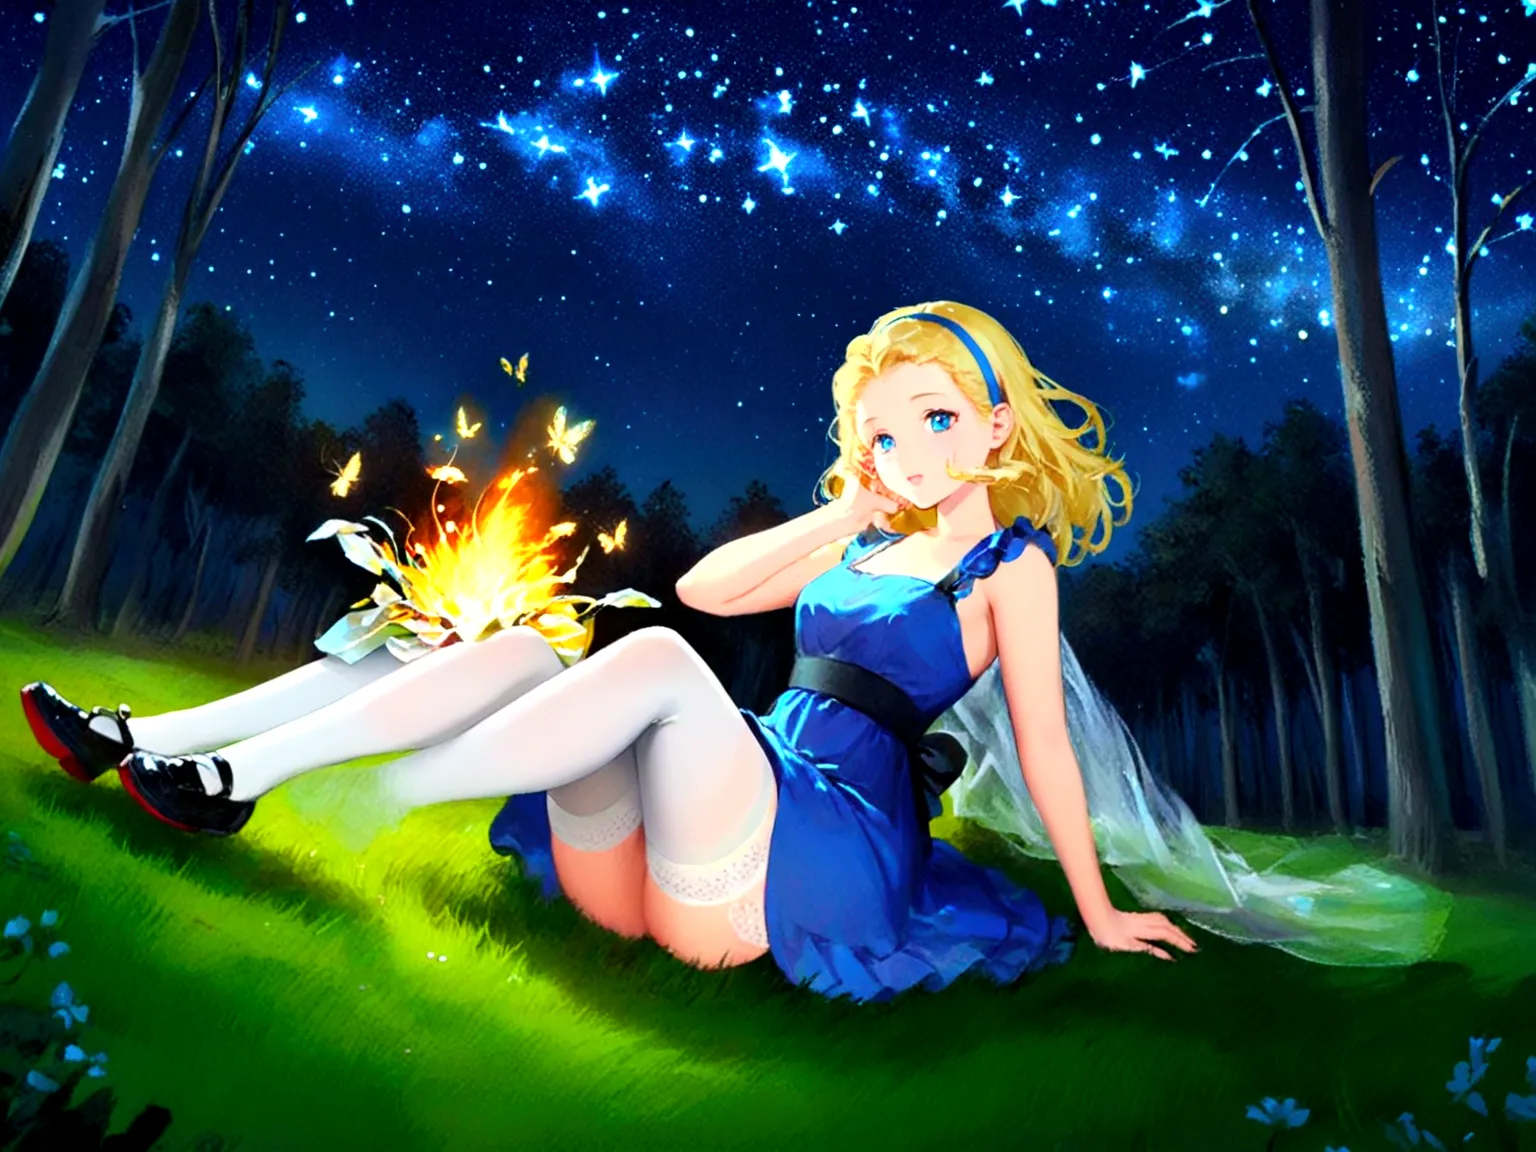 Big messy haired blonde anime woman with hairband, pale blue eyes, wearing blue dress with no sleeves, white stockings and littl...